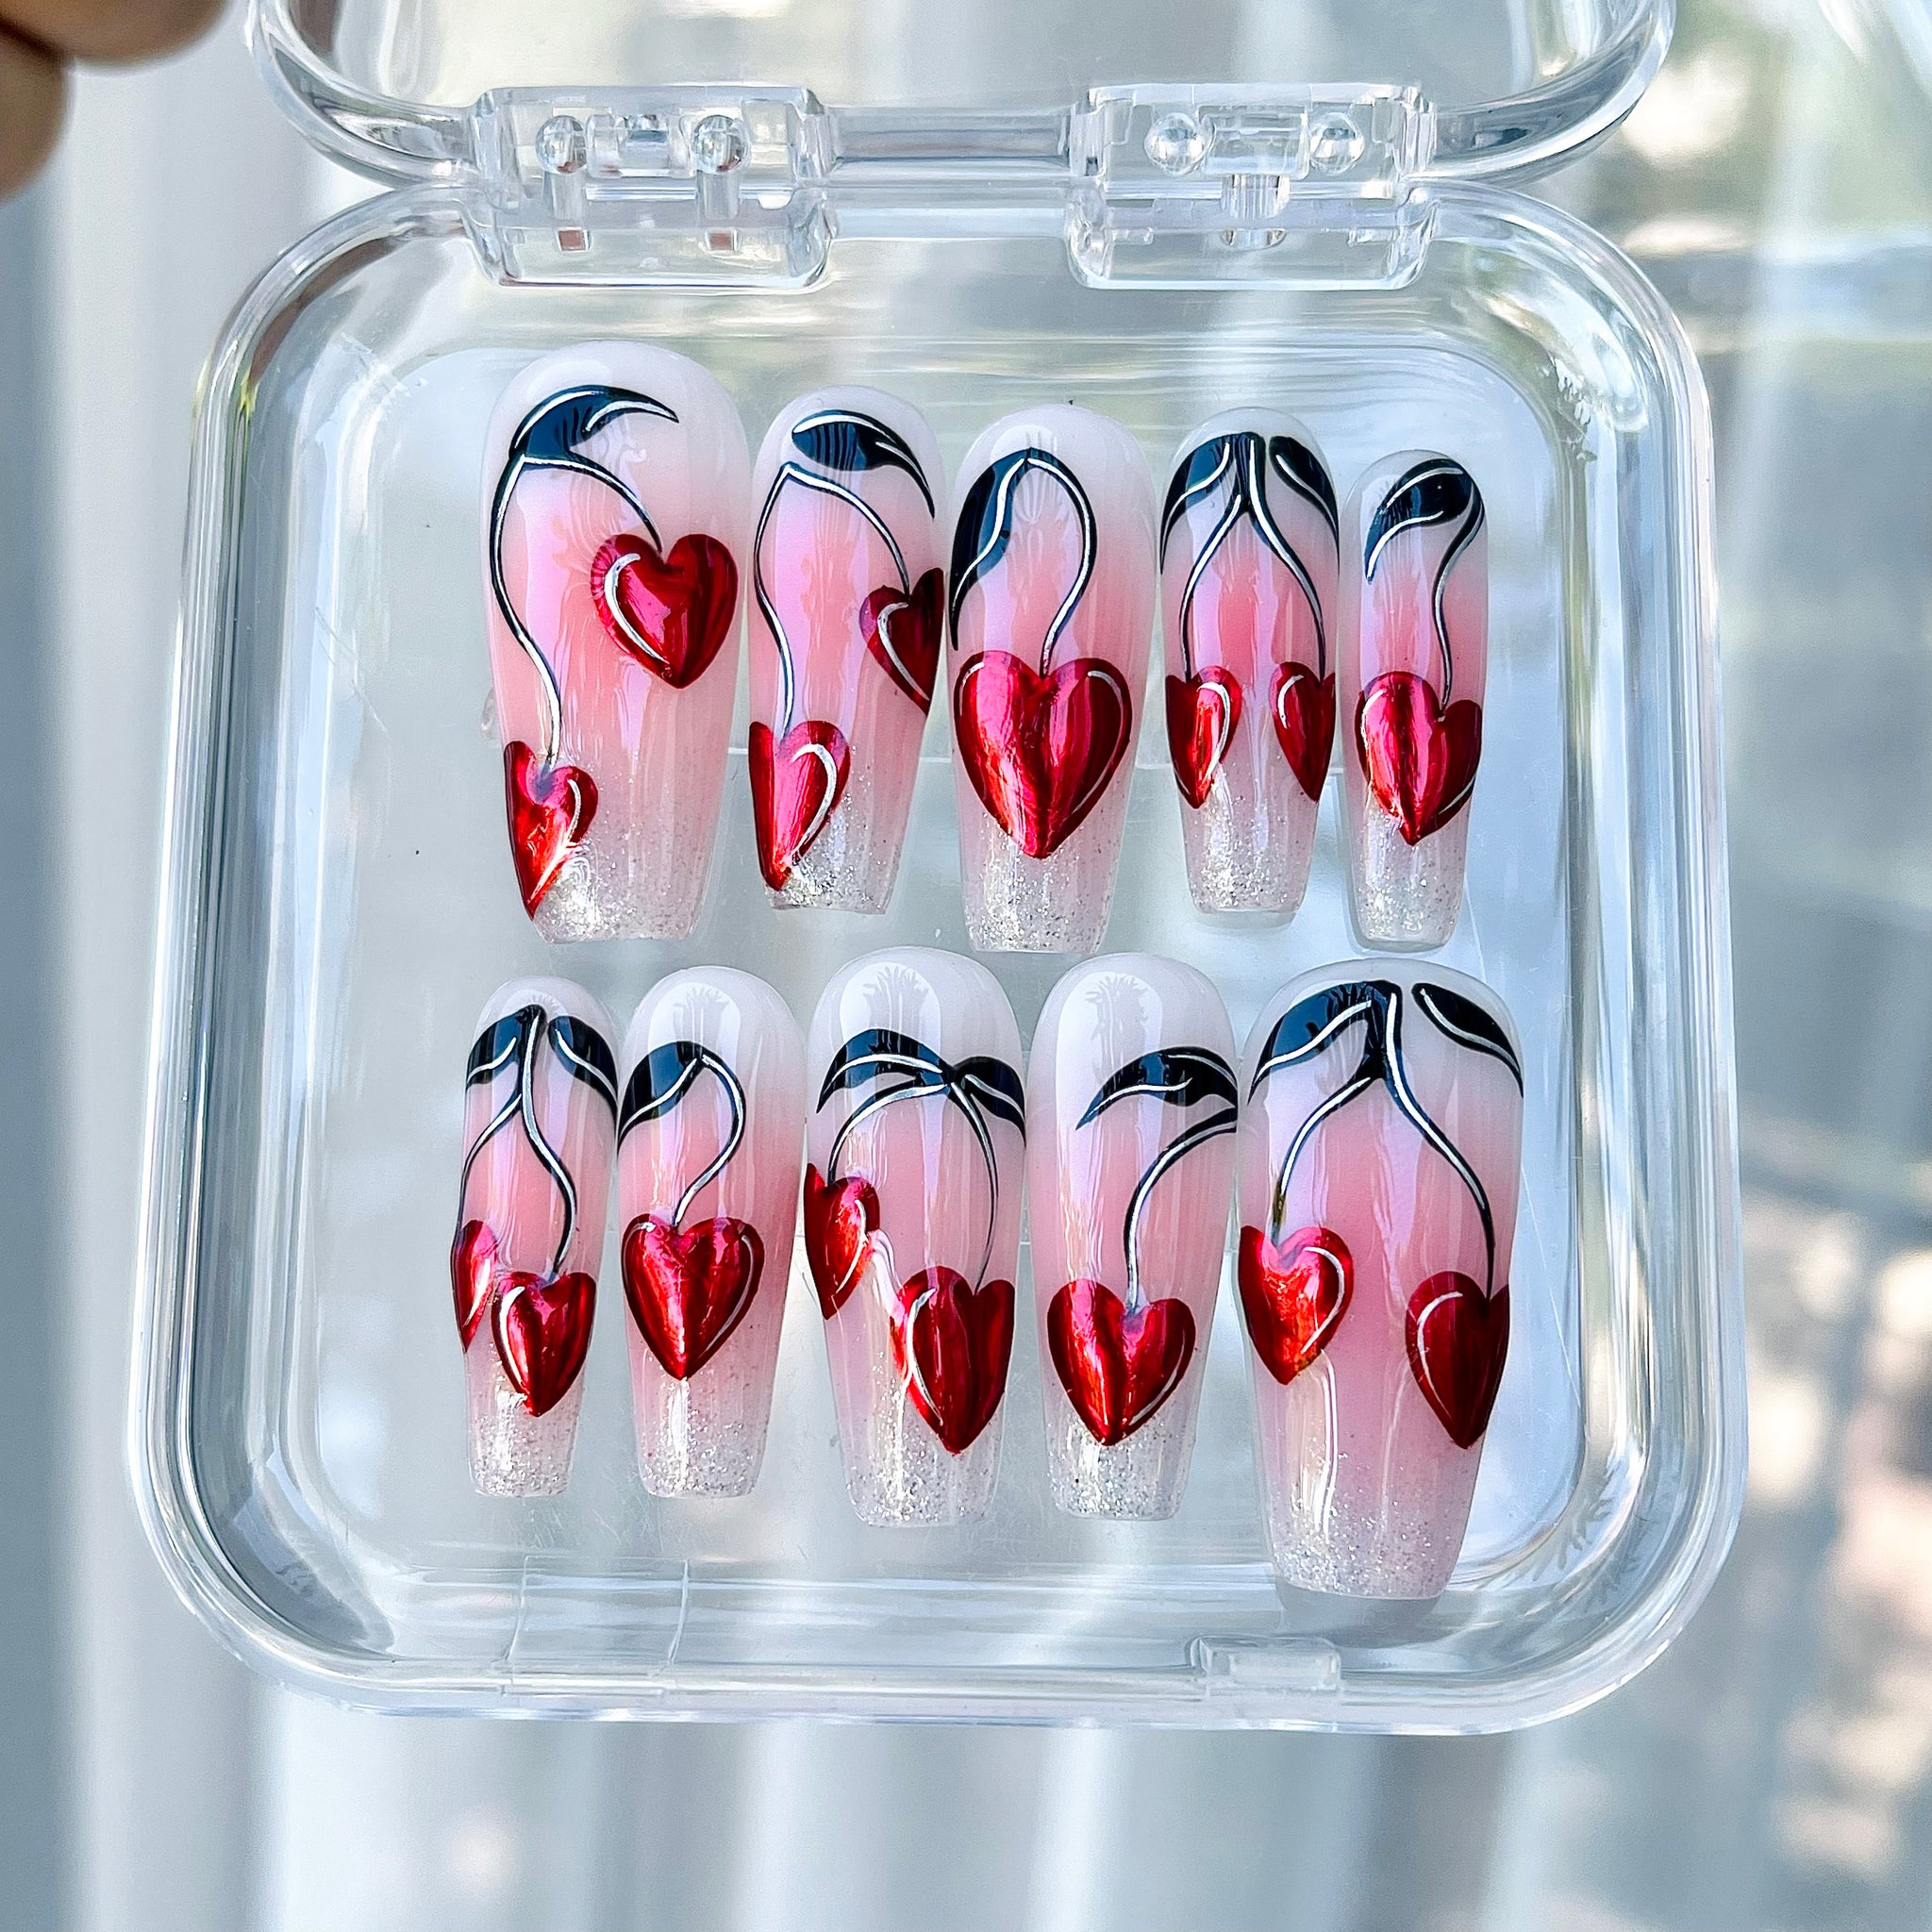 Red Heart Cherry Valentine Day Press on Nails - Pink Ombre Square Design